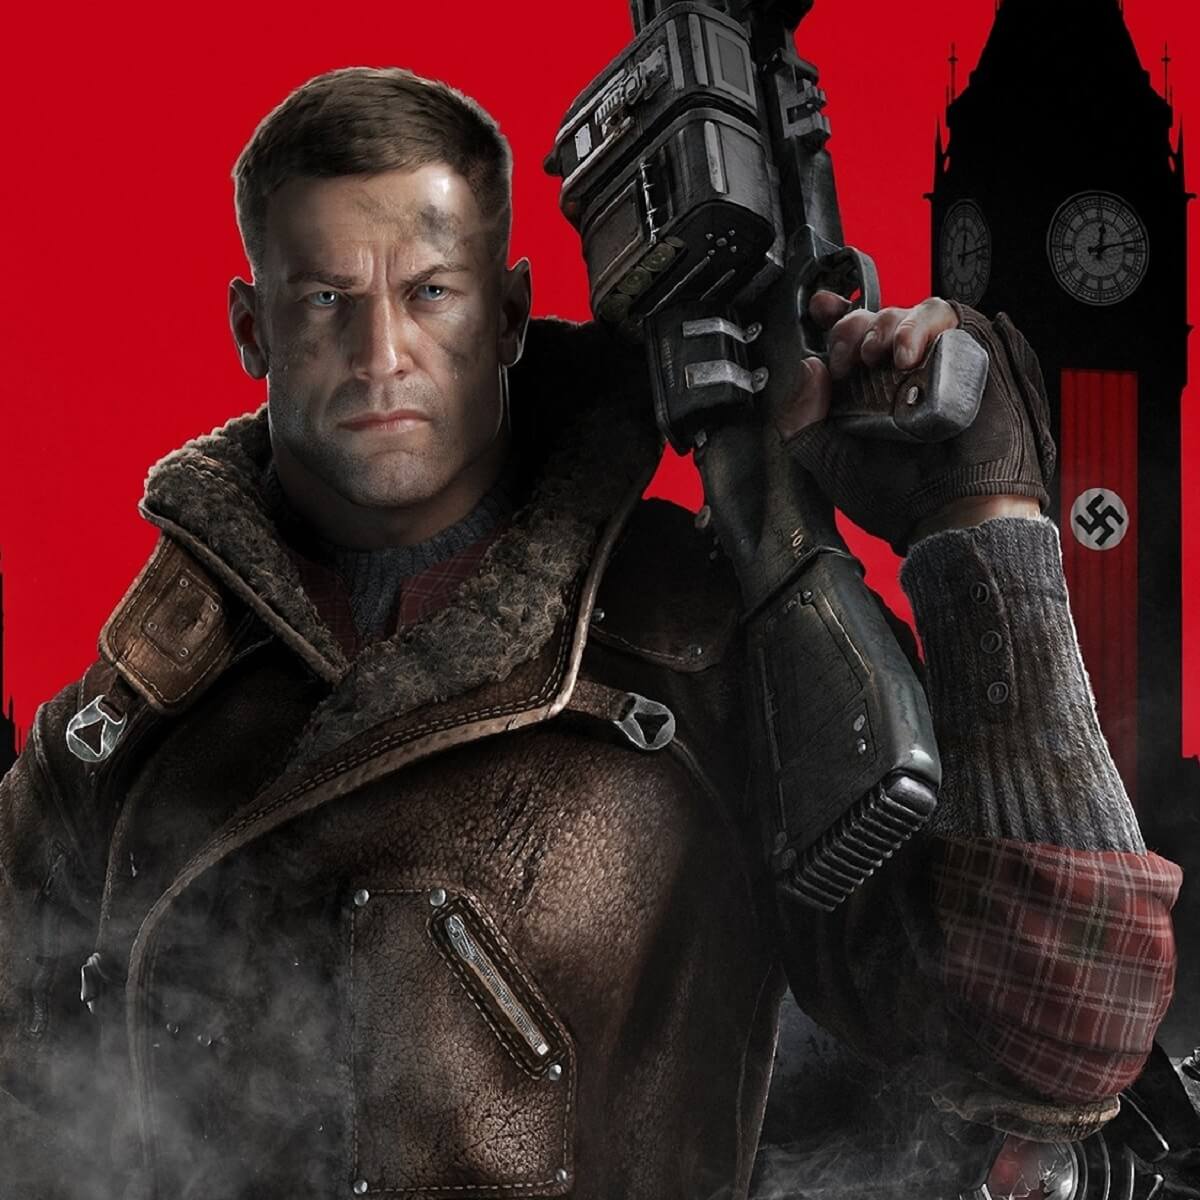 Wolfenstein: The New Order - PCGamingWiki PCGW - bugs, fixes, crashes,  mods, guides and improvements for every PC game